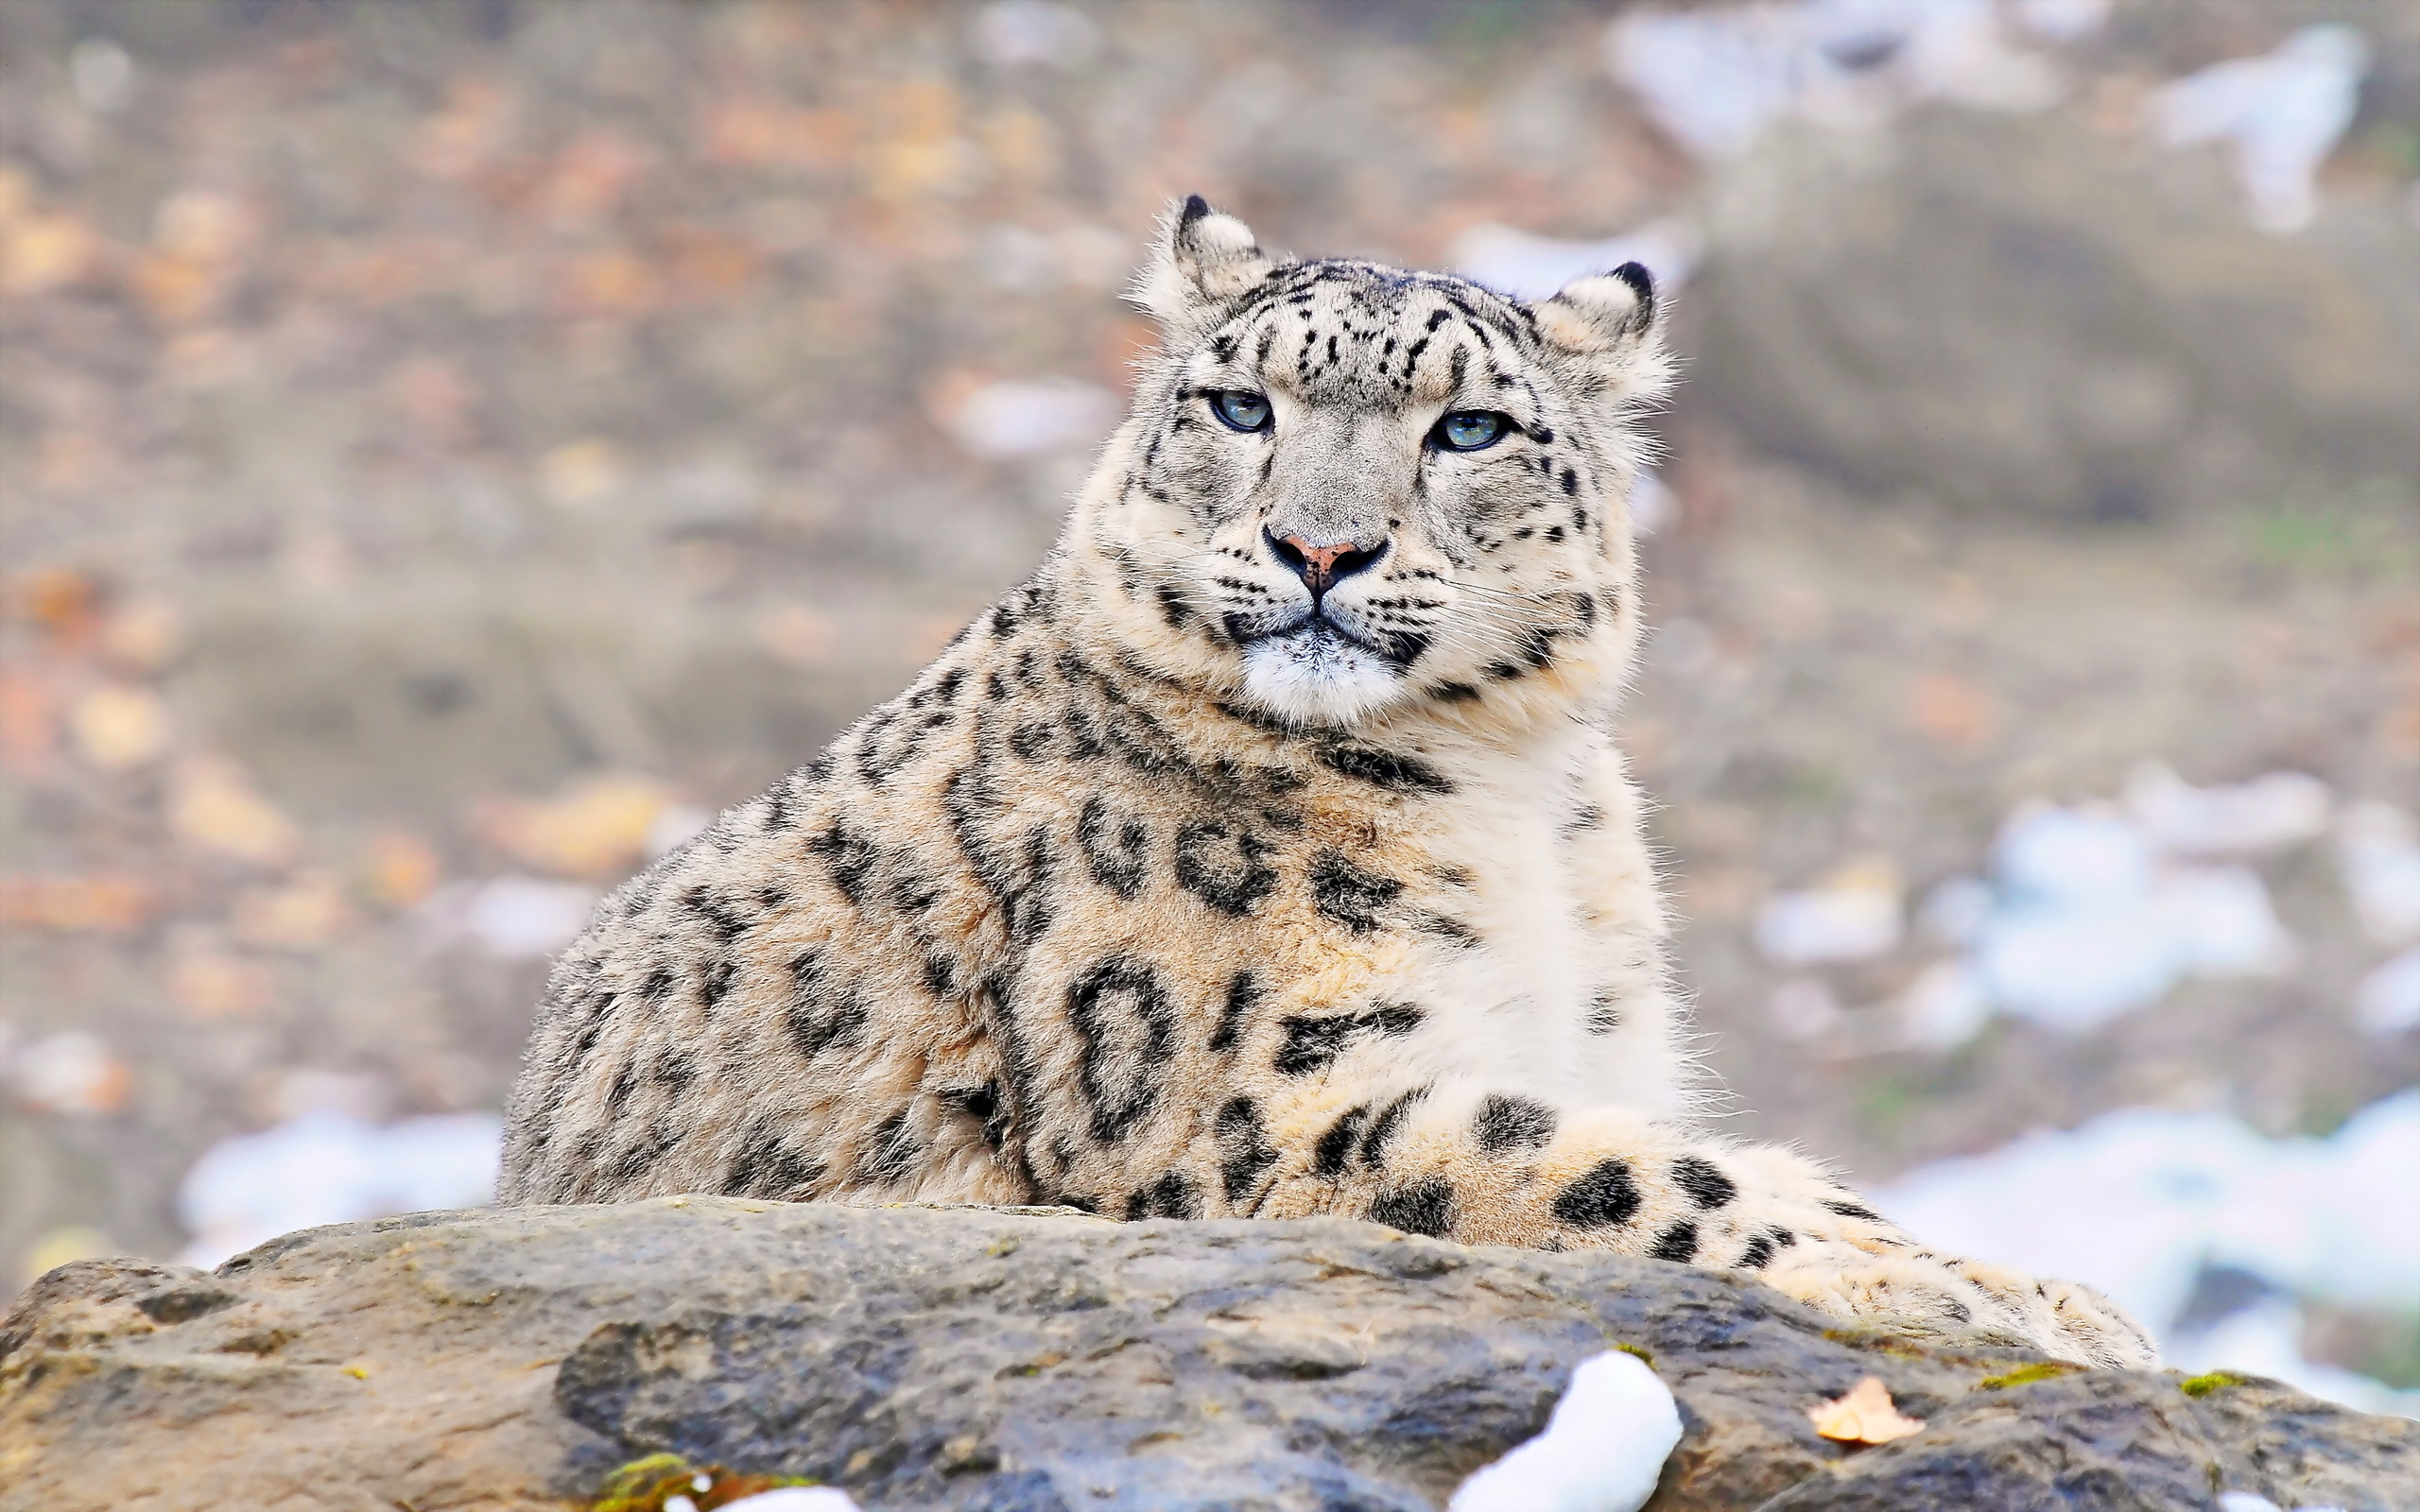  Snow Leopard HQ Background Wallpapers